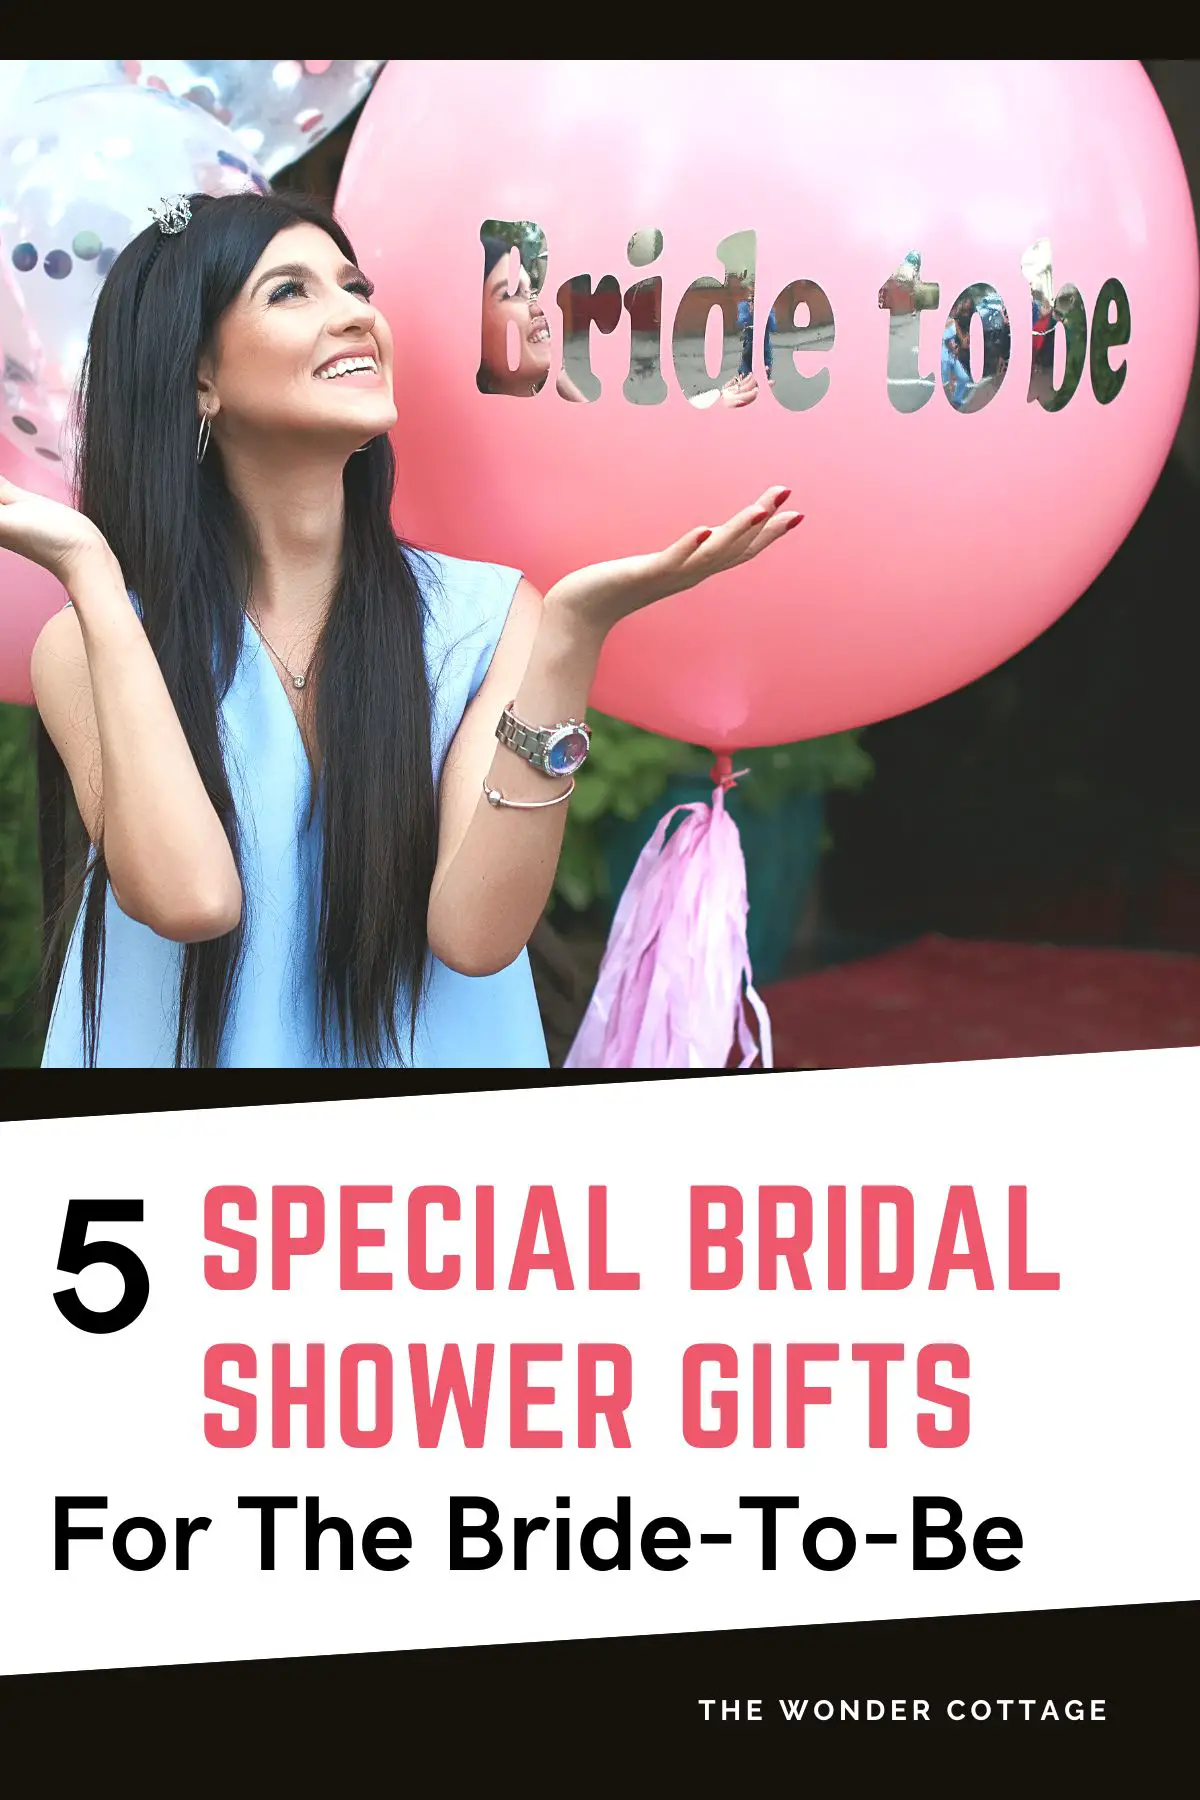 Special Bridal Shower Gifts For The Bride-To-Be